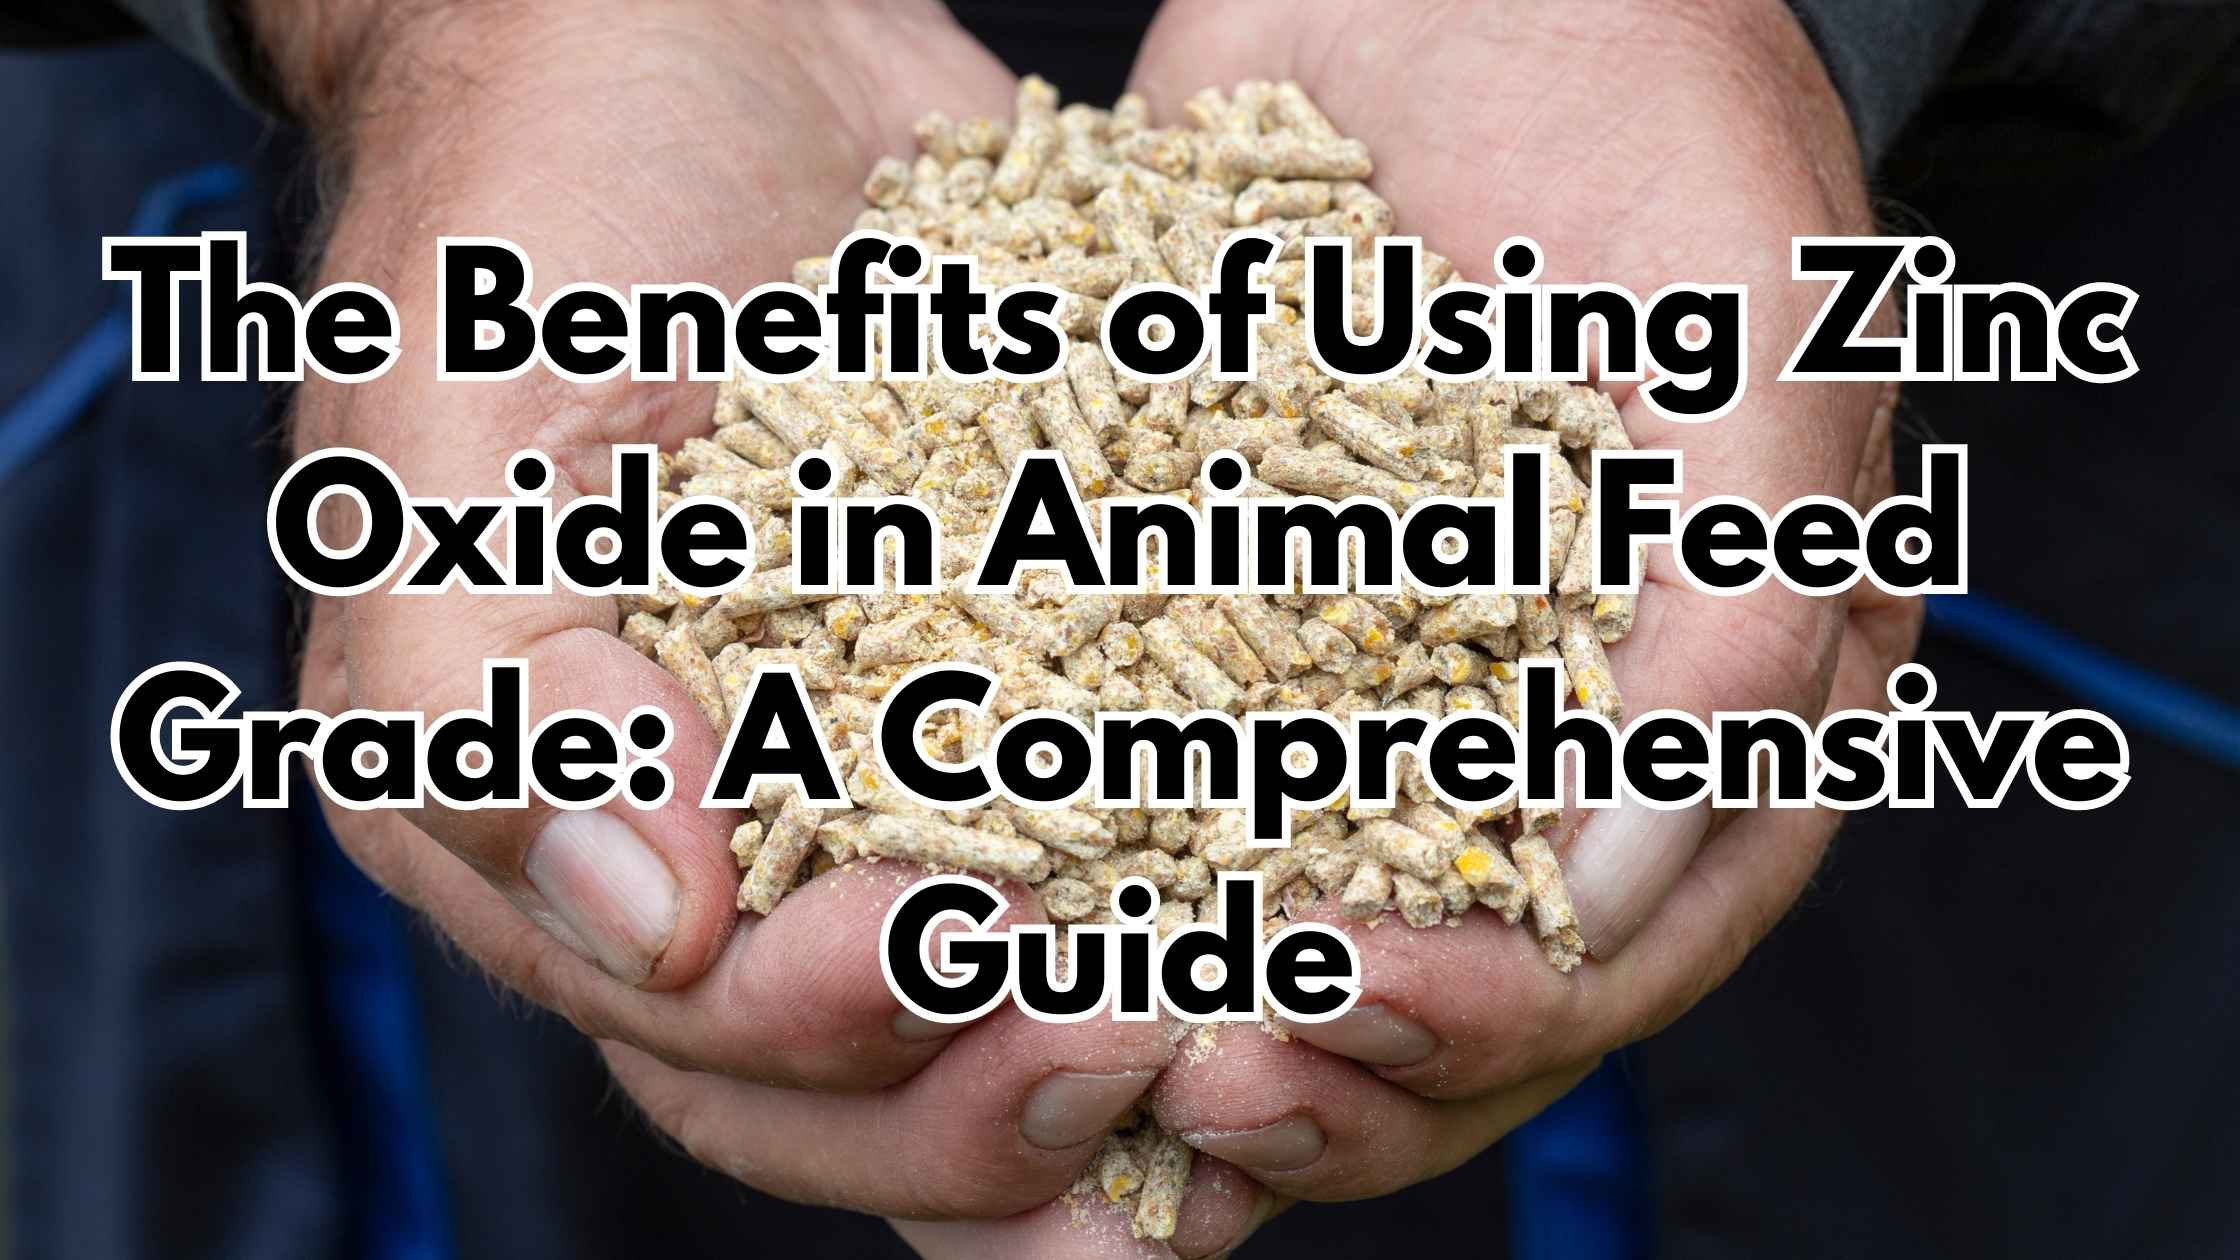 The Benefits of Using Zinc Oxide in Animal Feed Grade: A Comprehensive Guide